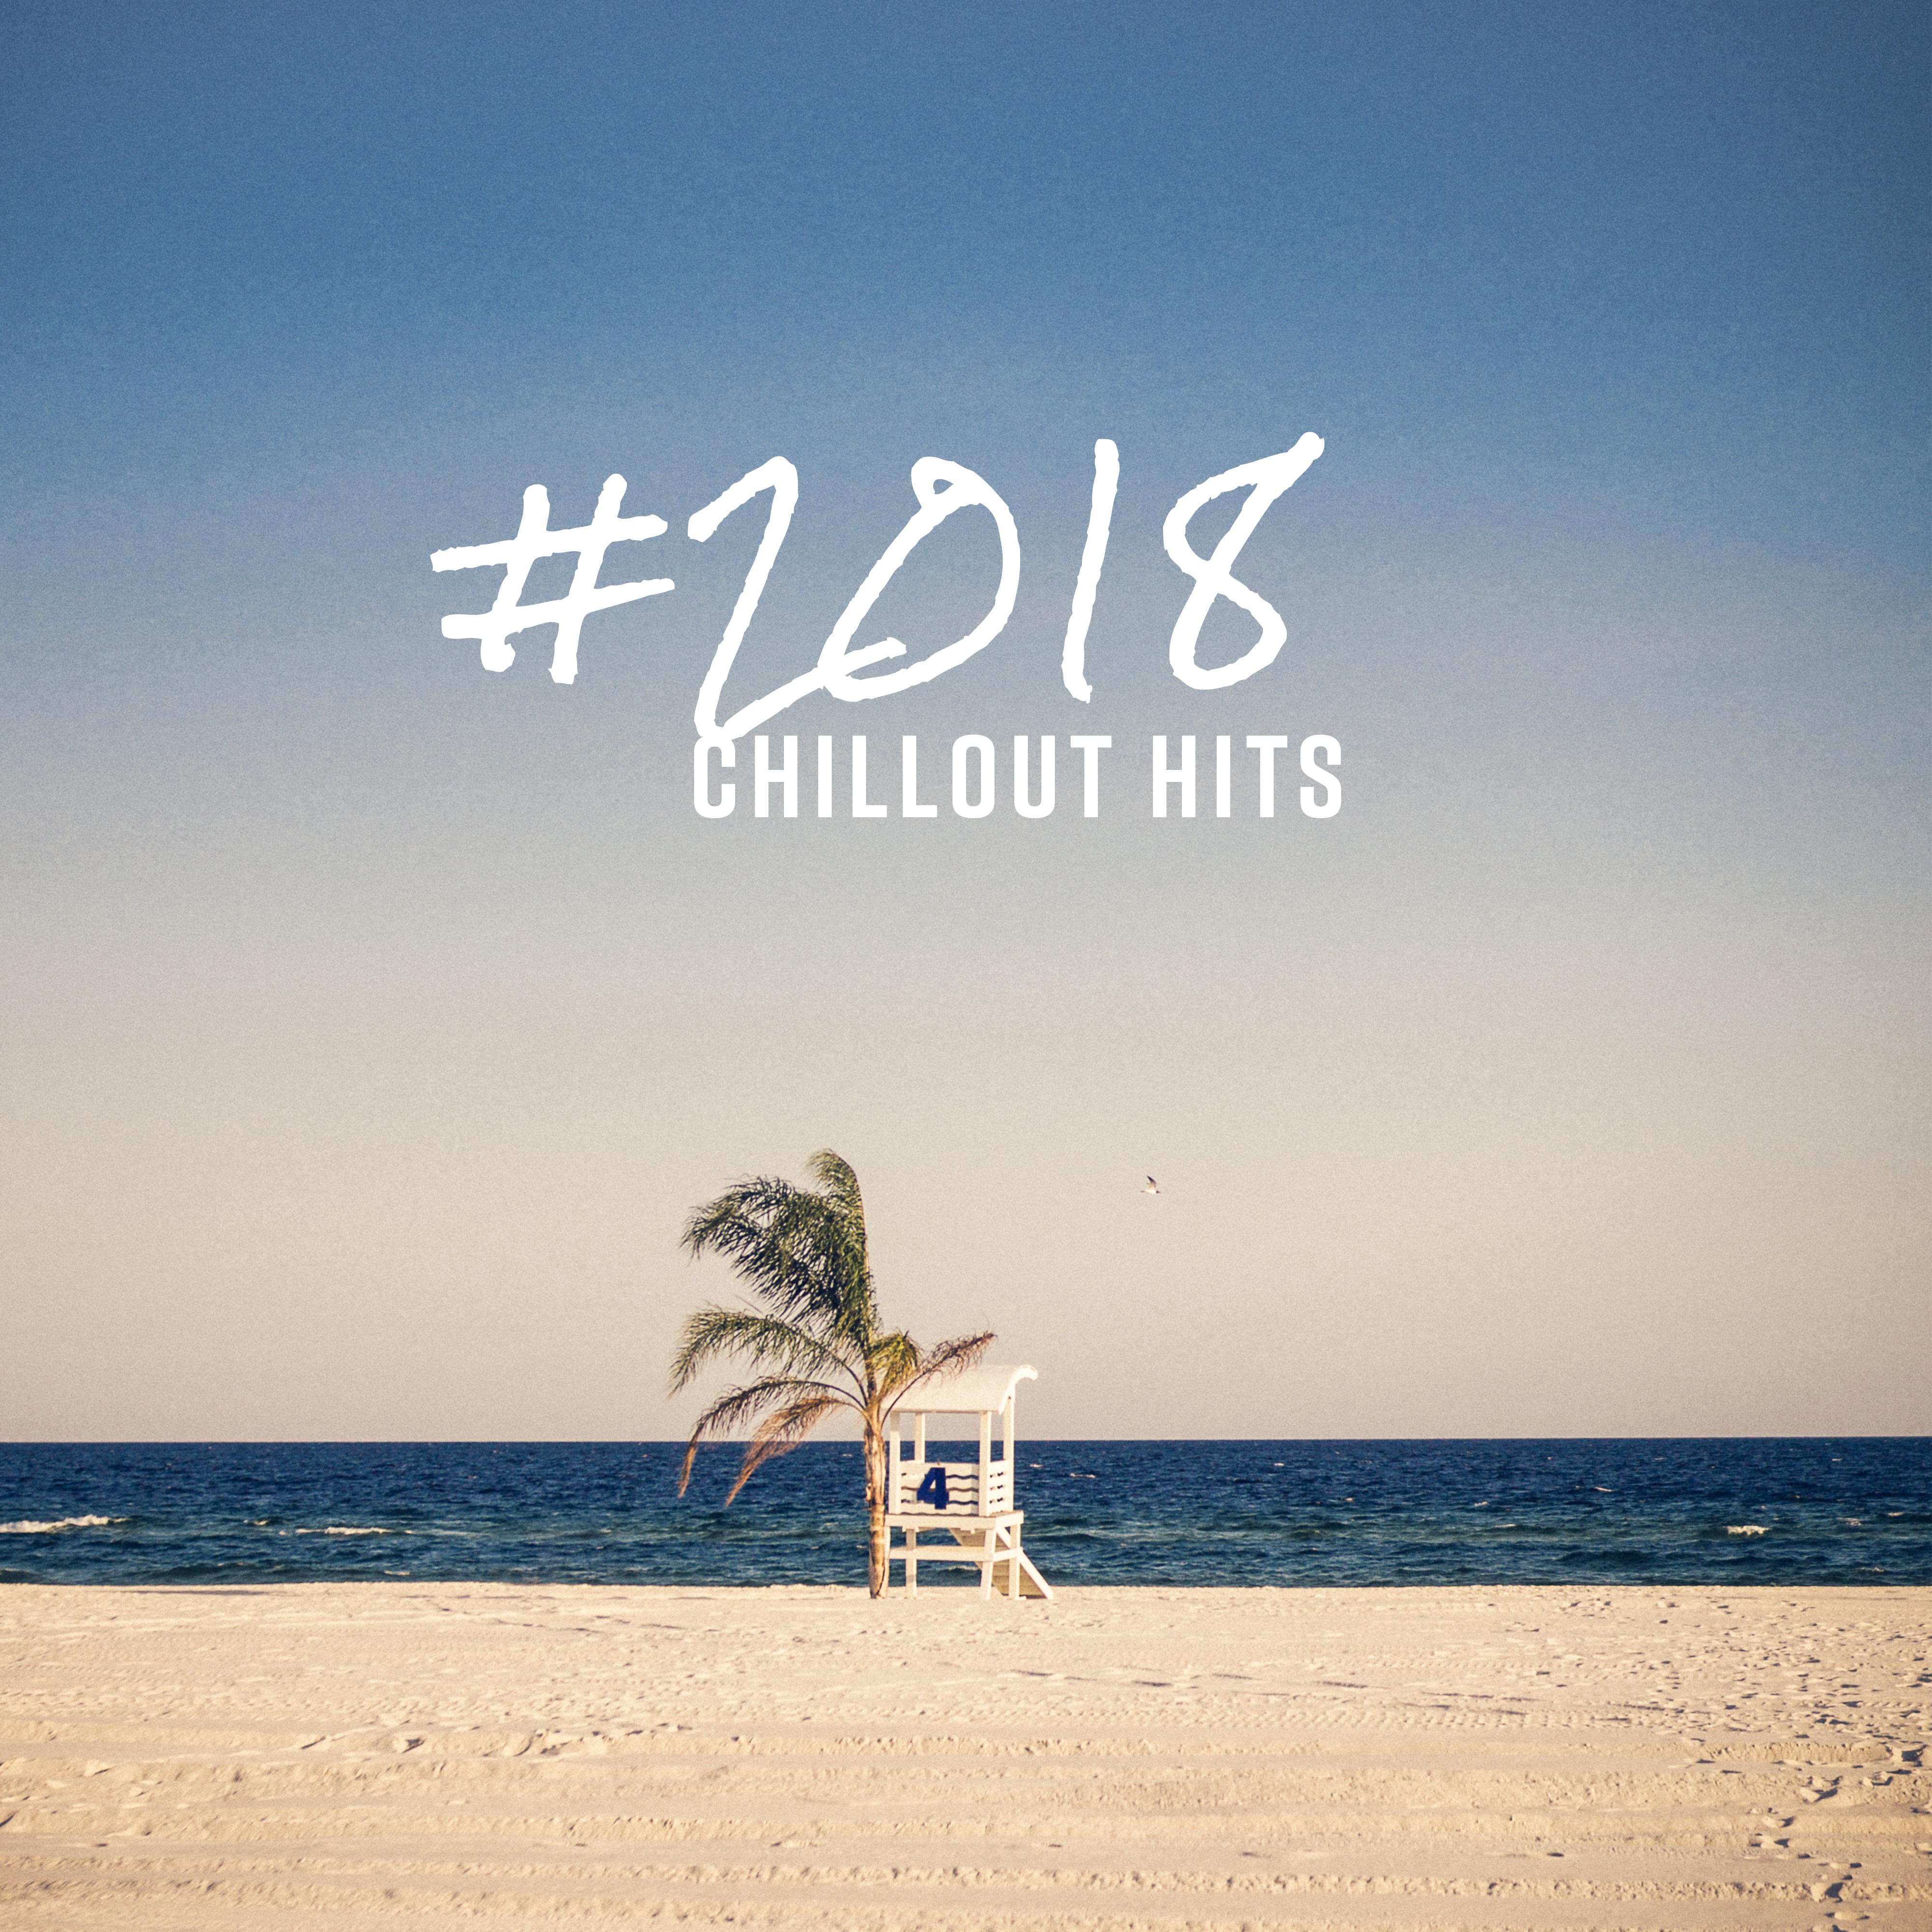 #2018 Chillout Hits